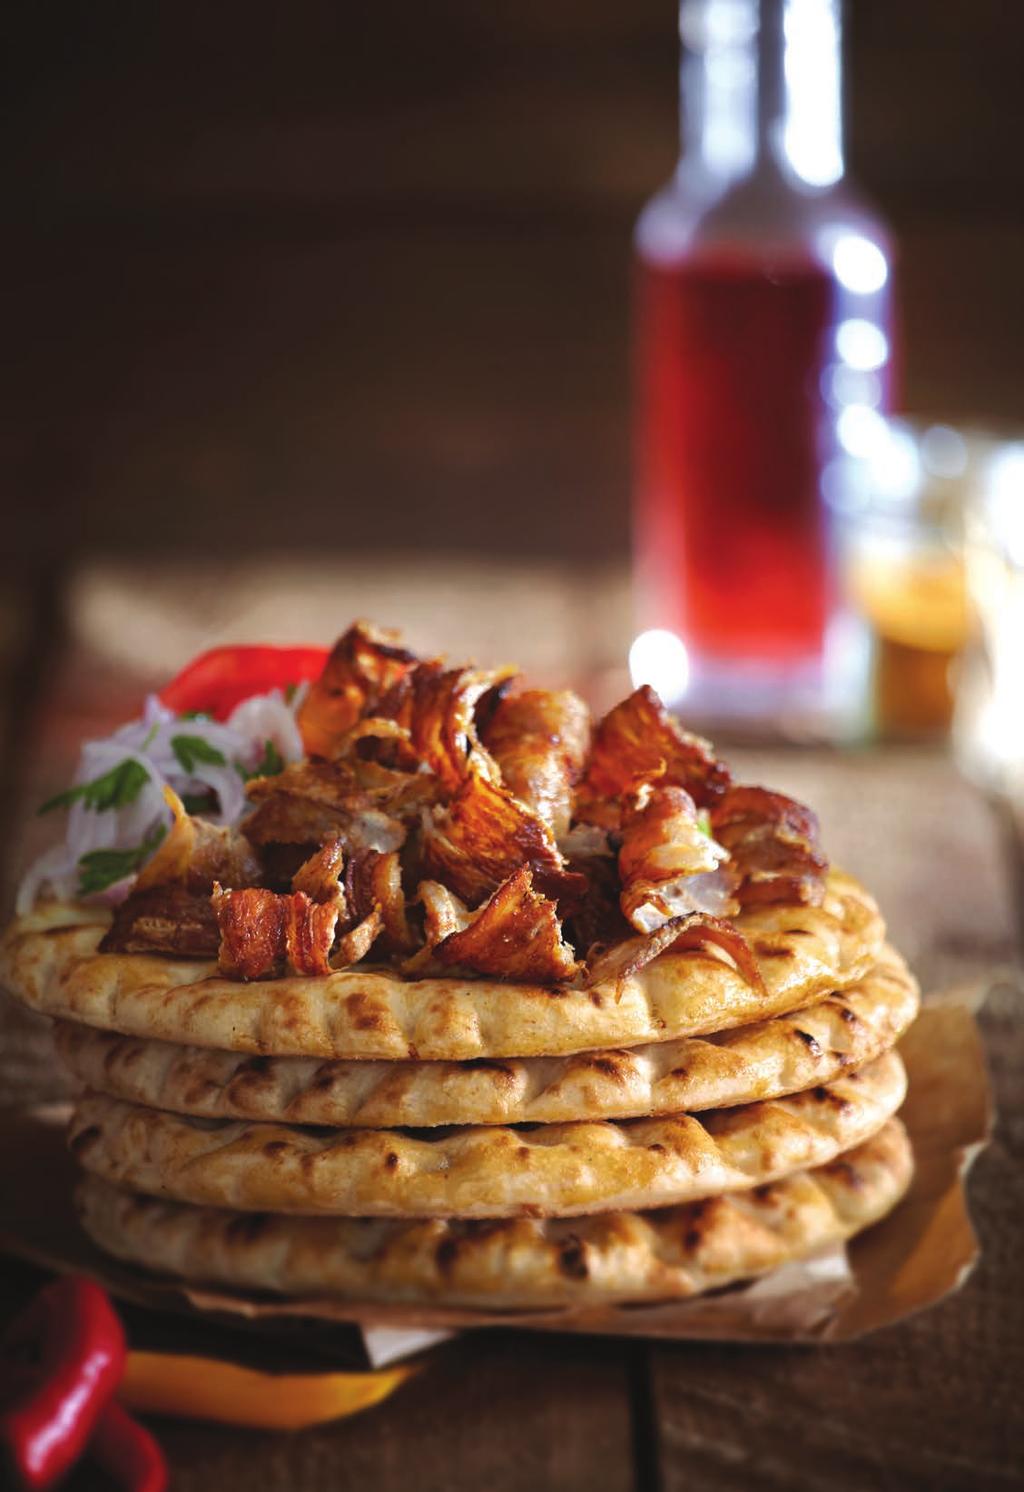 flatbreads made with passion Today, the flatbread history is taken up by the craftsman who, through his ideas, changed its course in Greece, Evangelos Kolios.